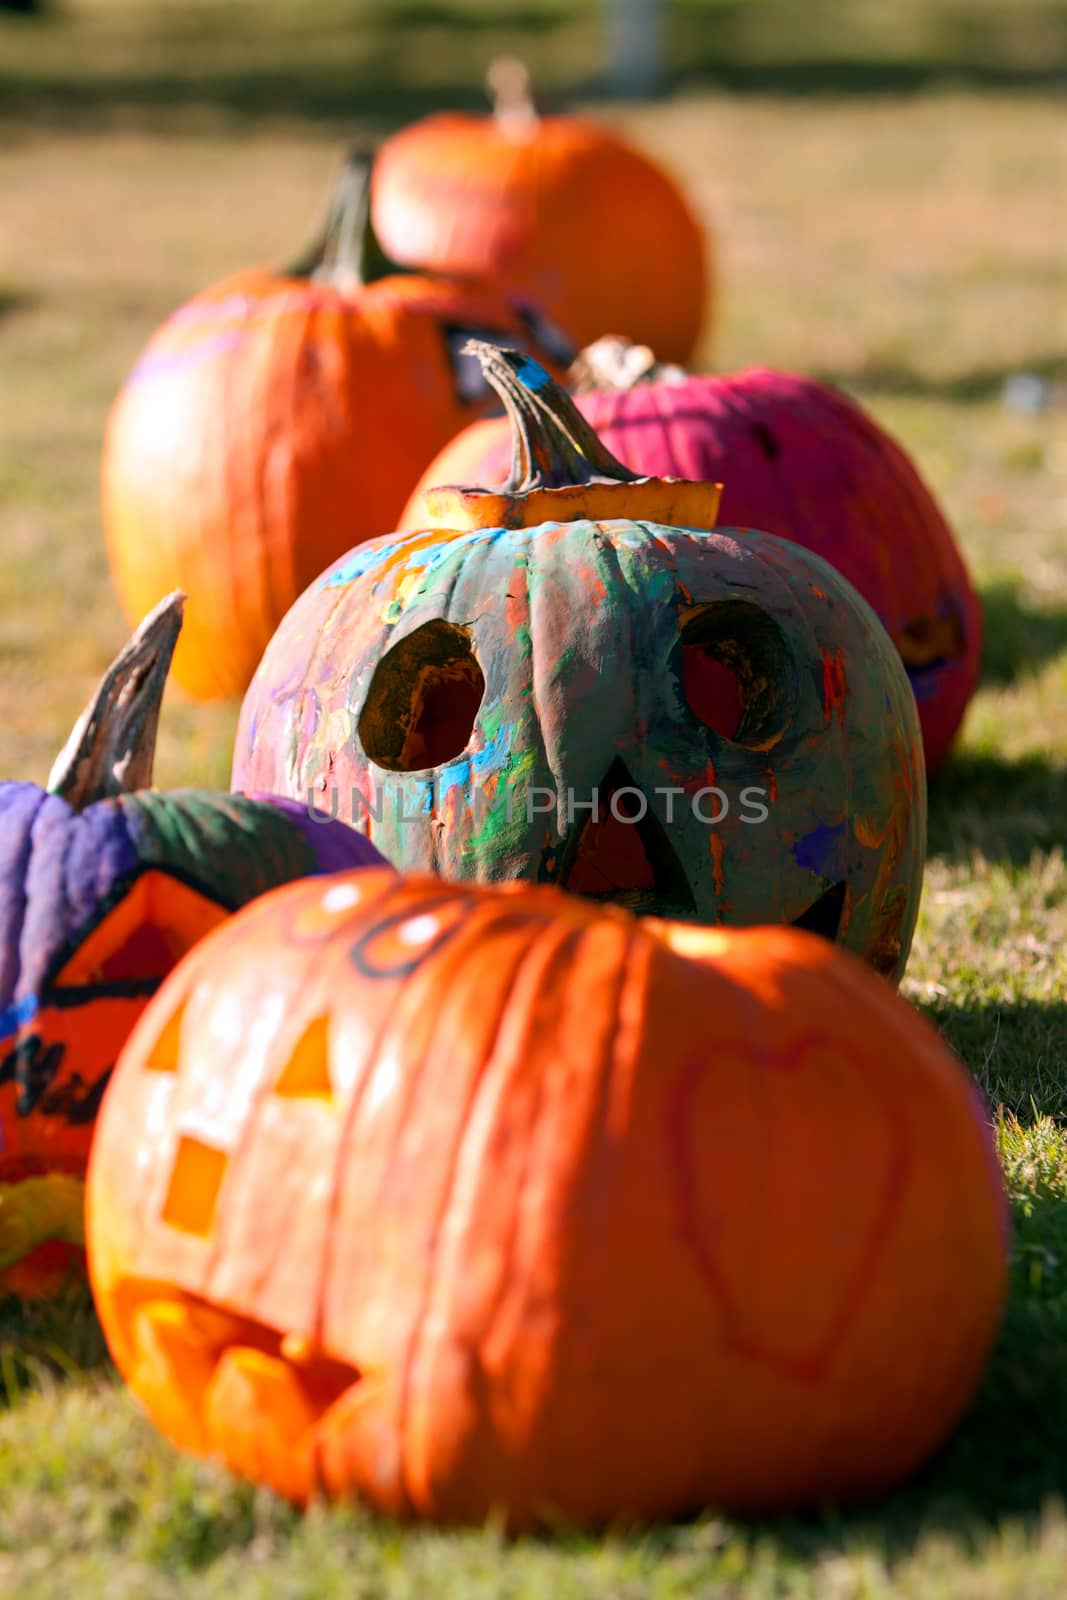 Painted And Carved Pumpkins Dry In The Autumn Sun by BluIz60